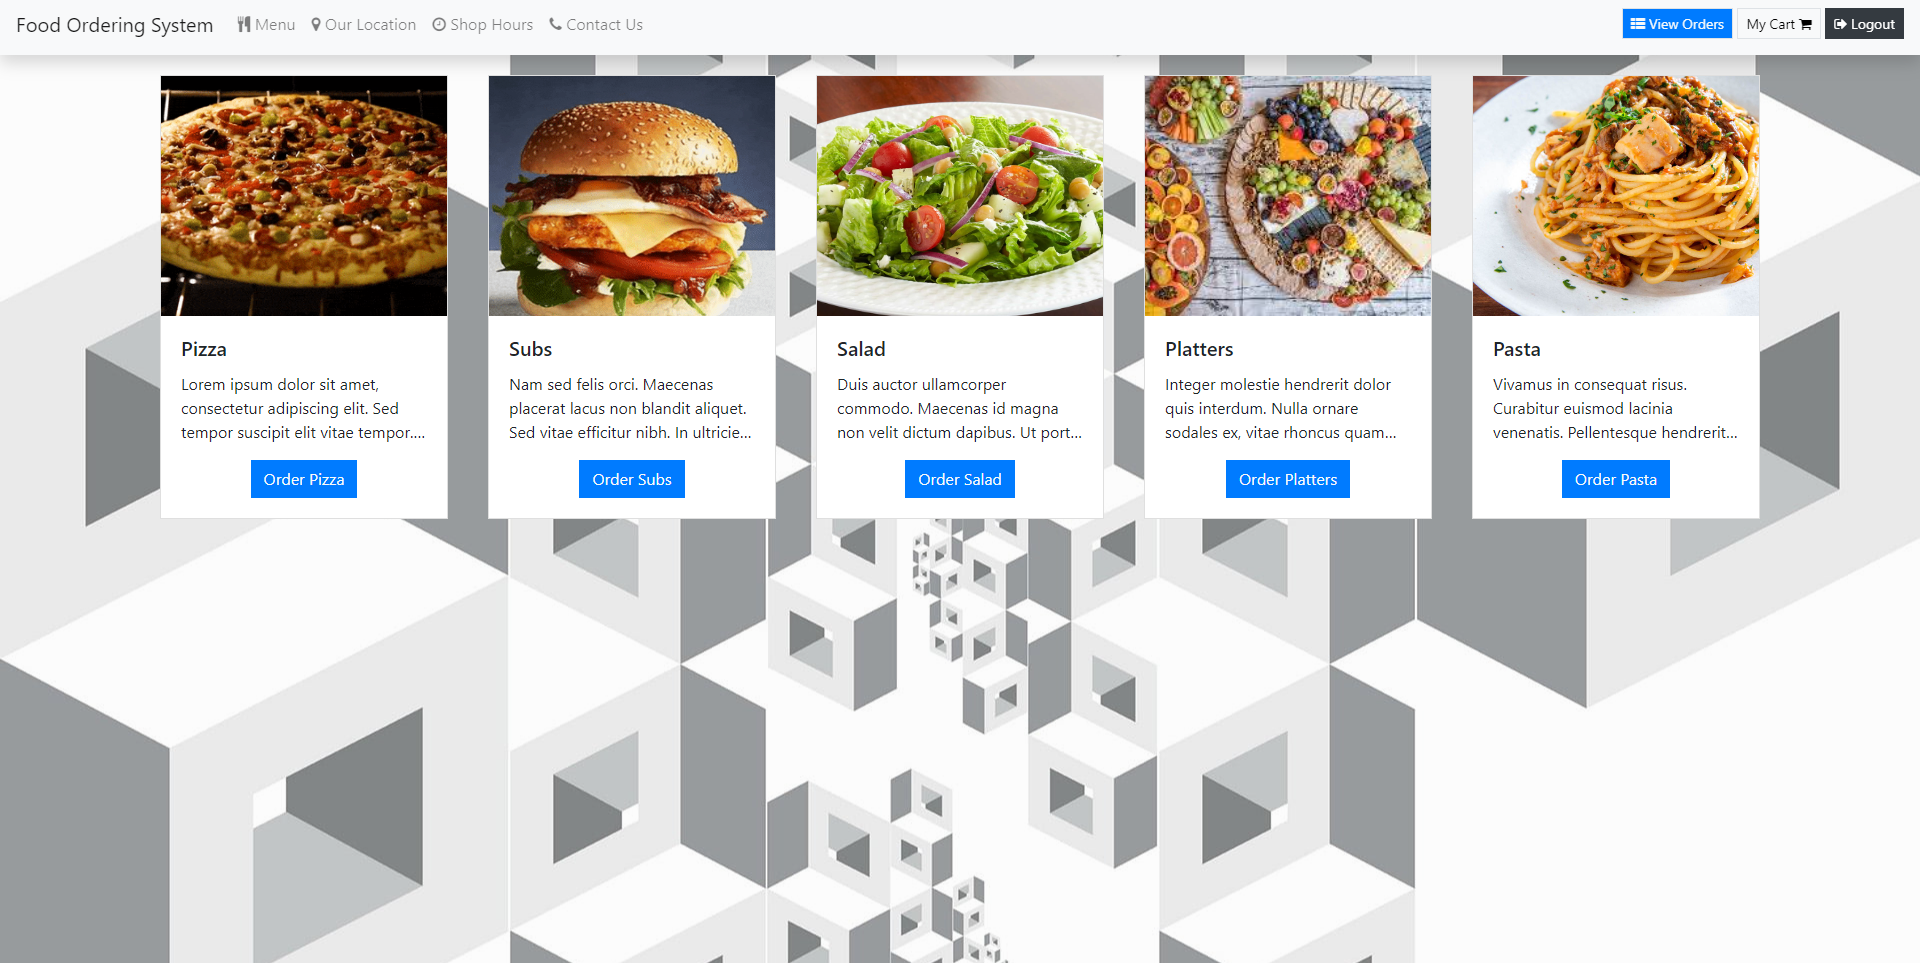 Food Ordering System